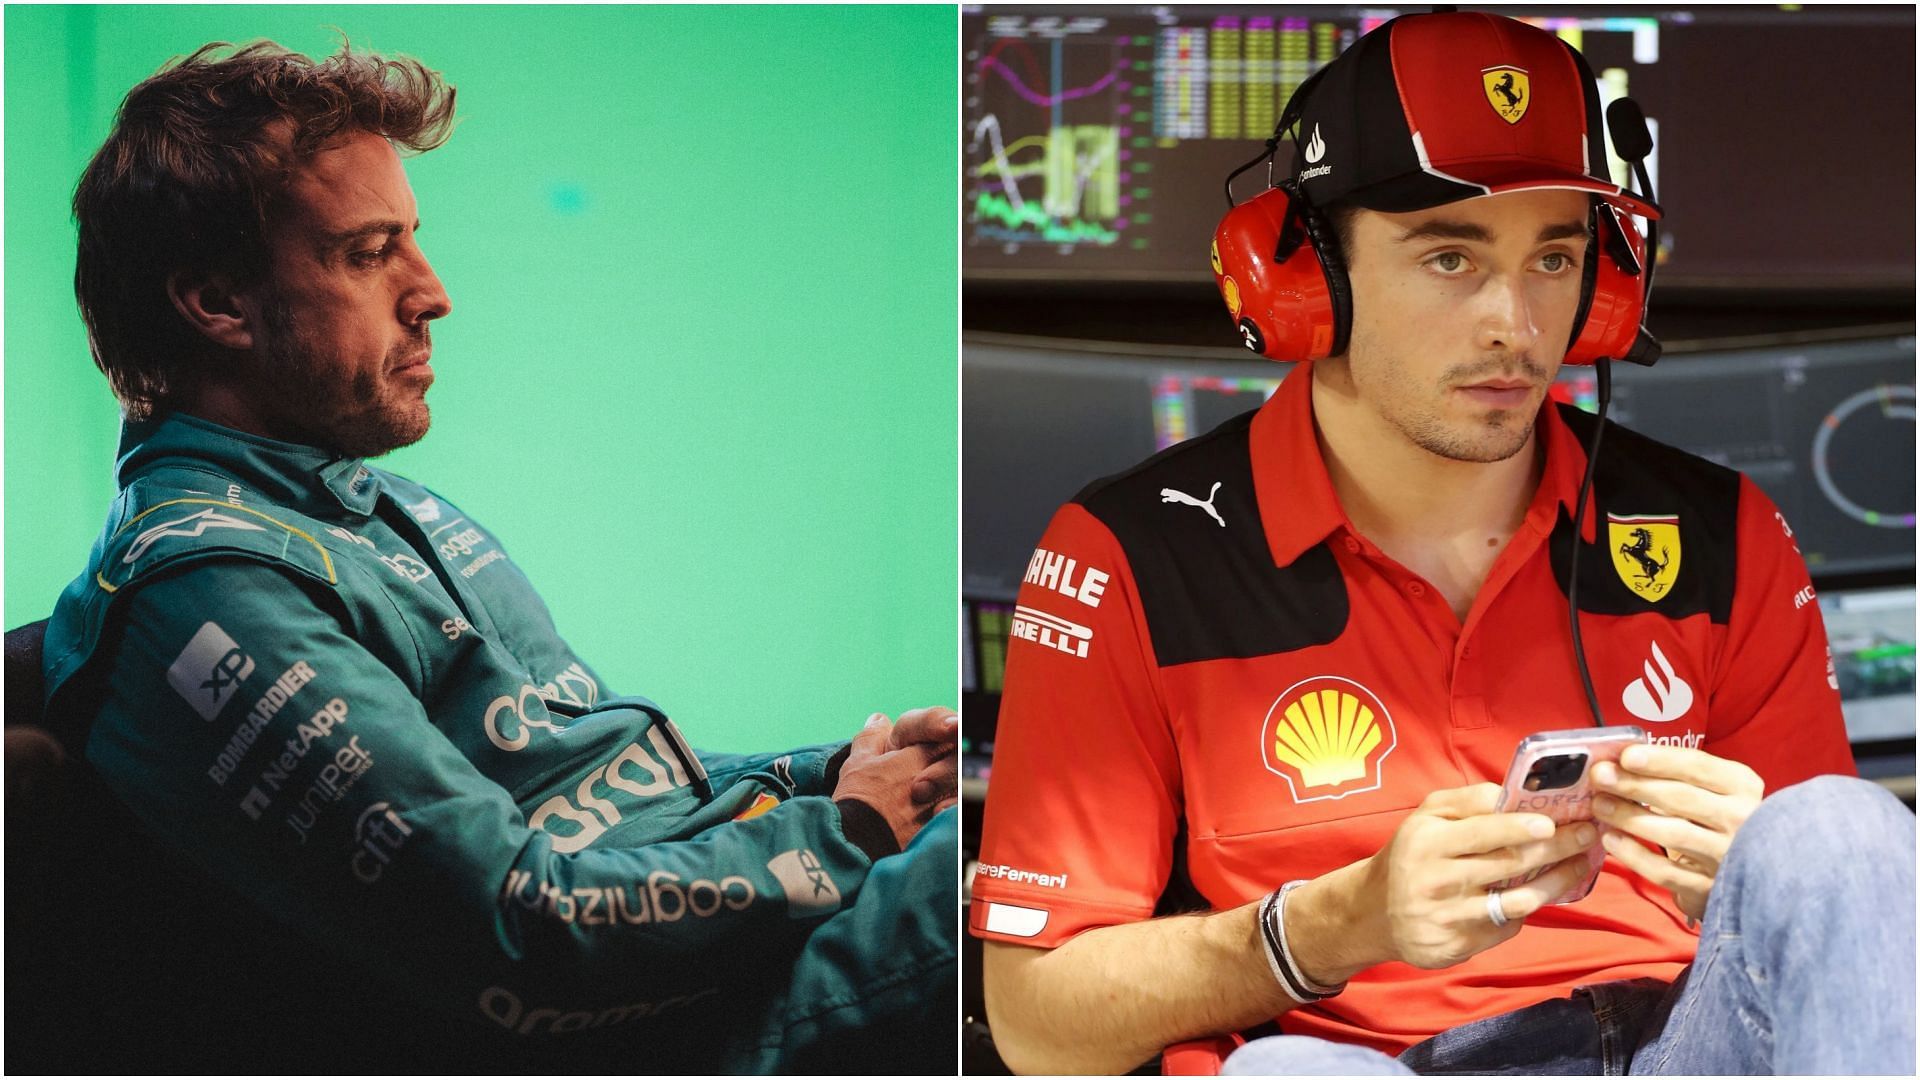 Fernando Alonso (Left) and Charles Leclerc (Right) (Collage via Sportskeeda)